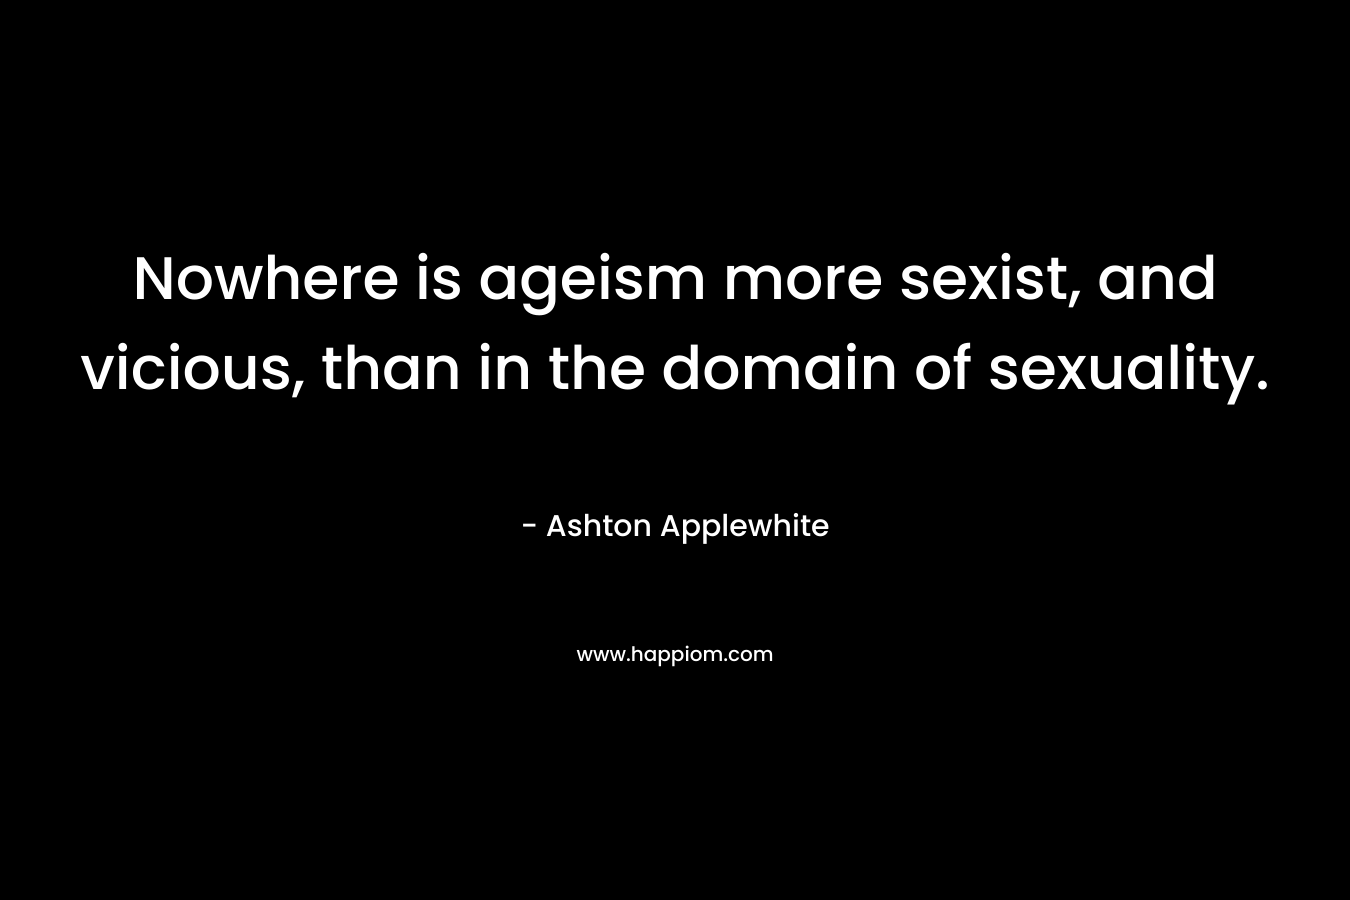 Nowhere is ageism more sexist, and vicious, than in the domain of sexuality. – Ashton Applewhite